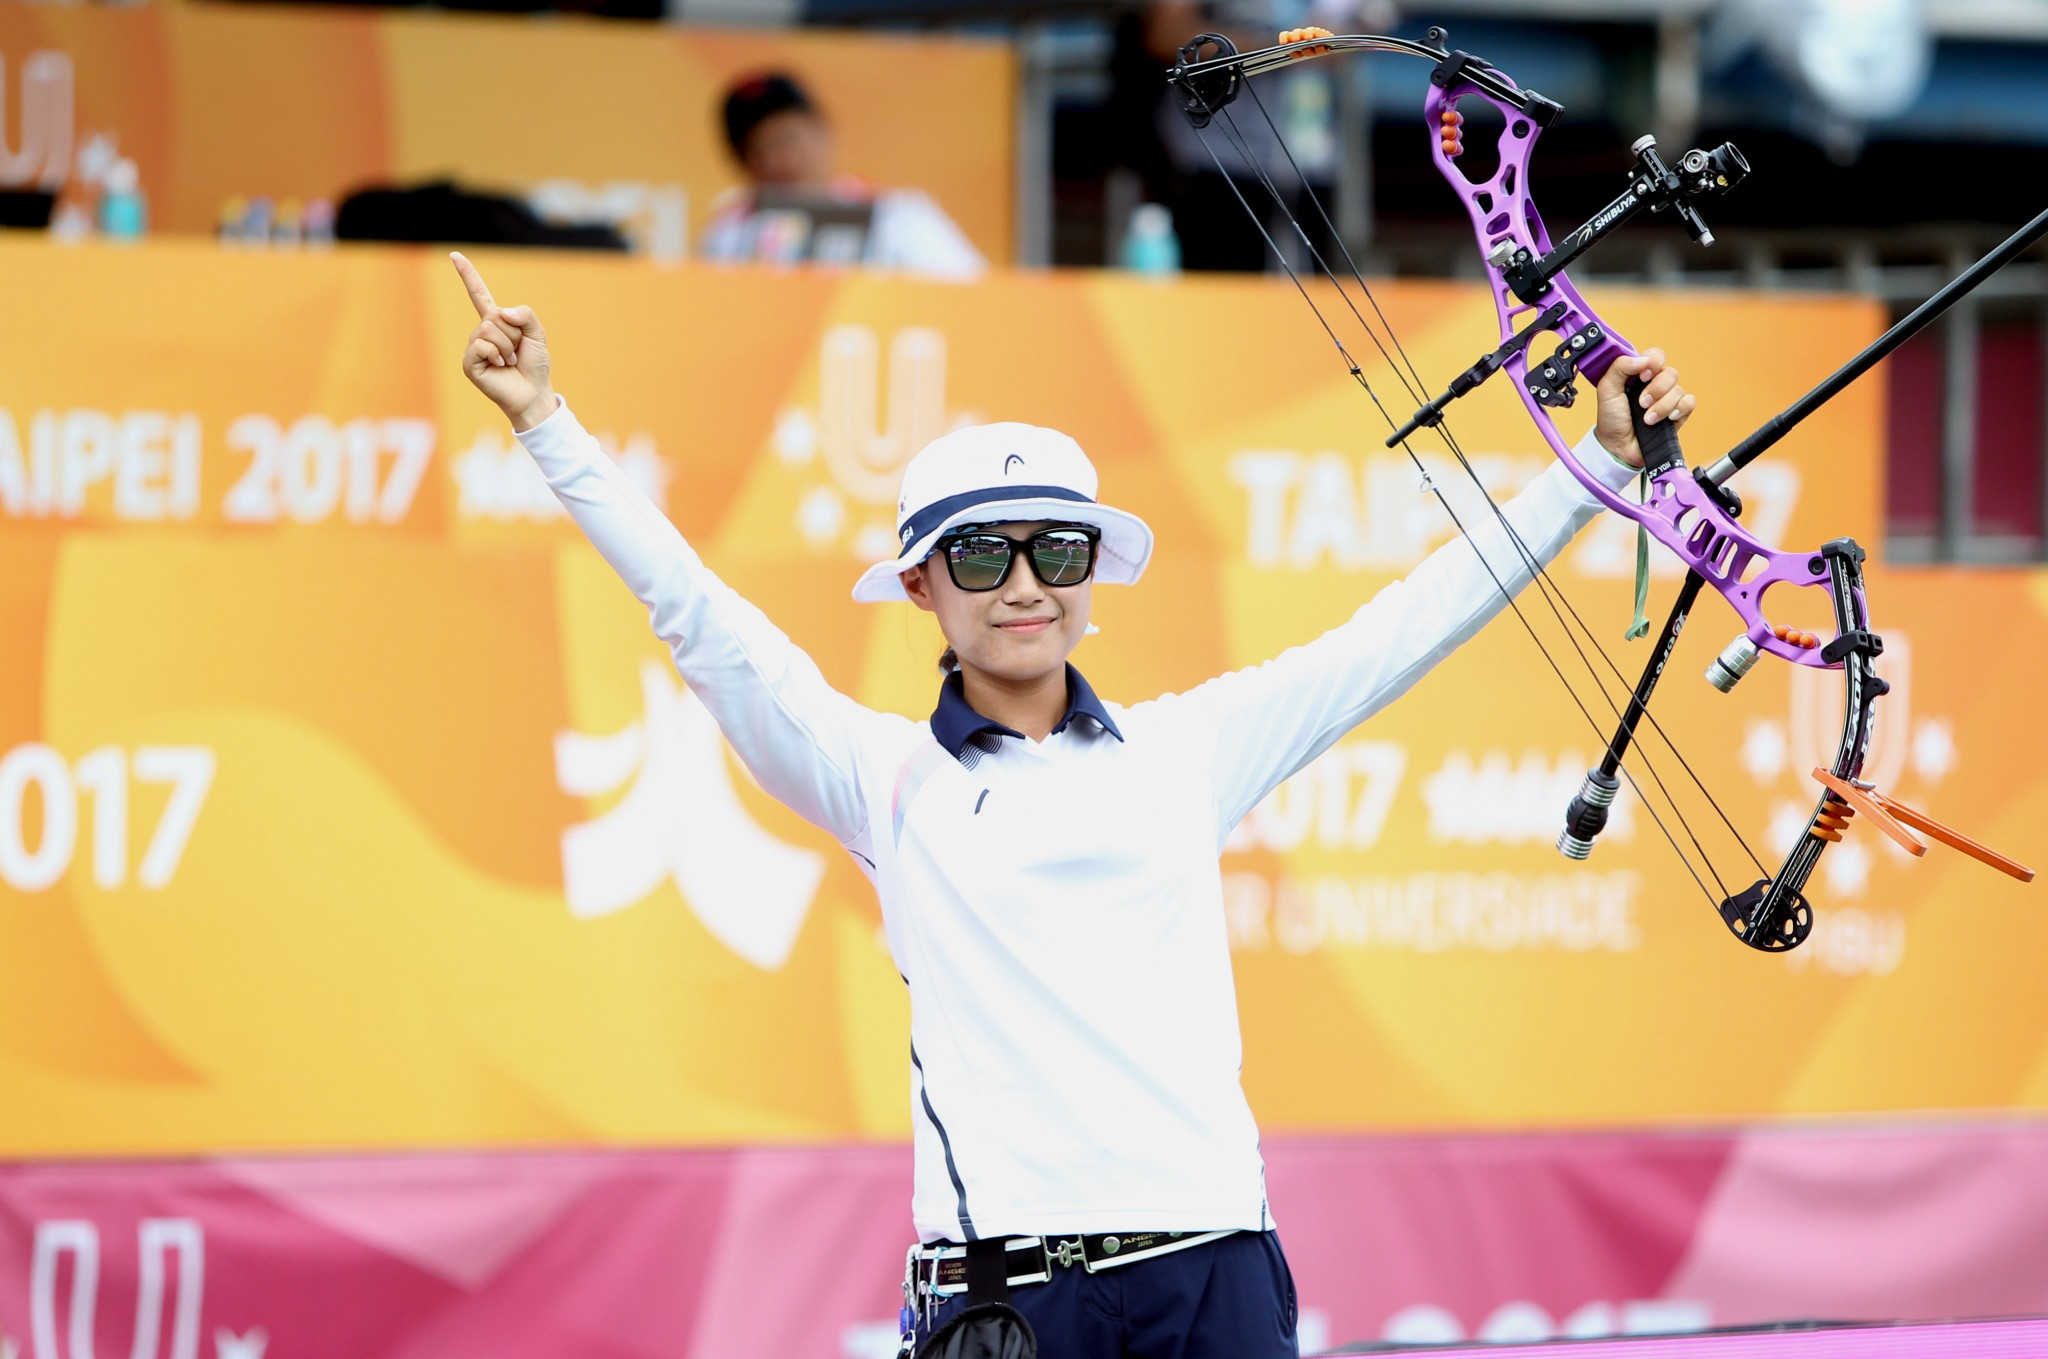 South Korea won four out of five archery gold medals today ©Taipei 2017